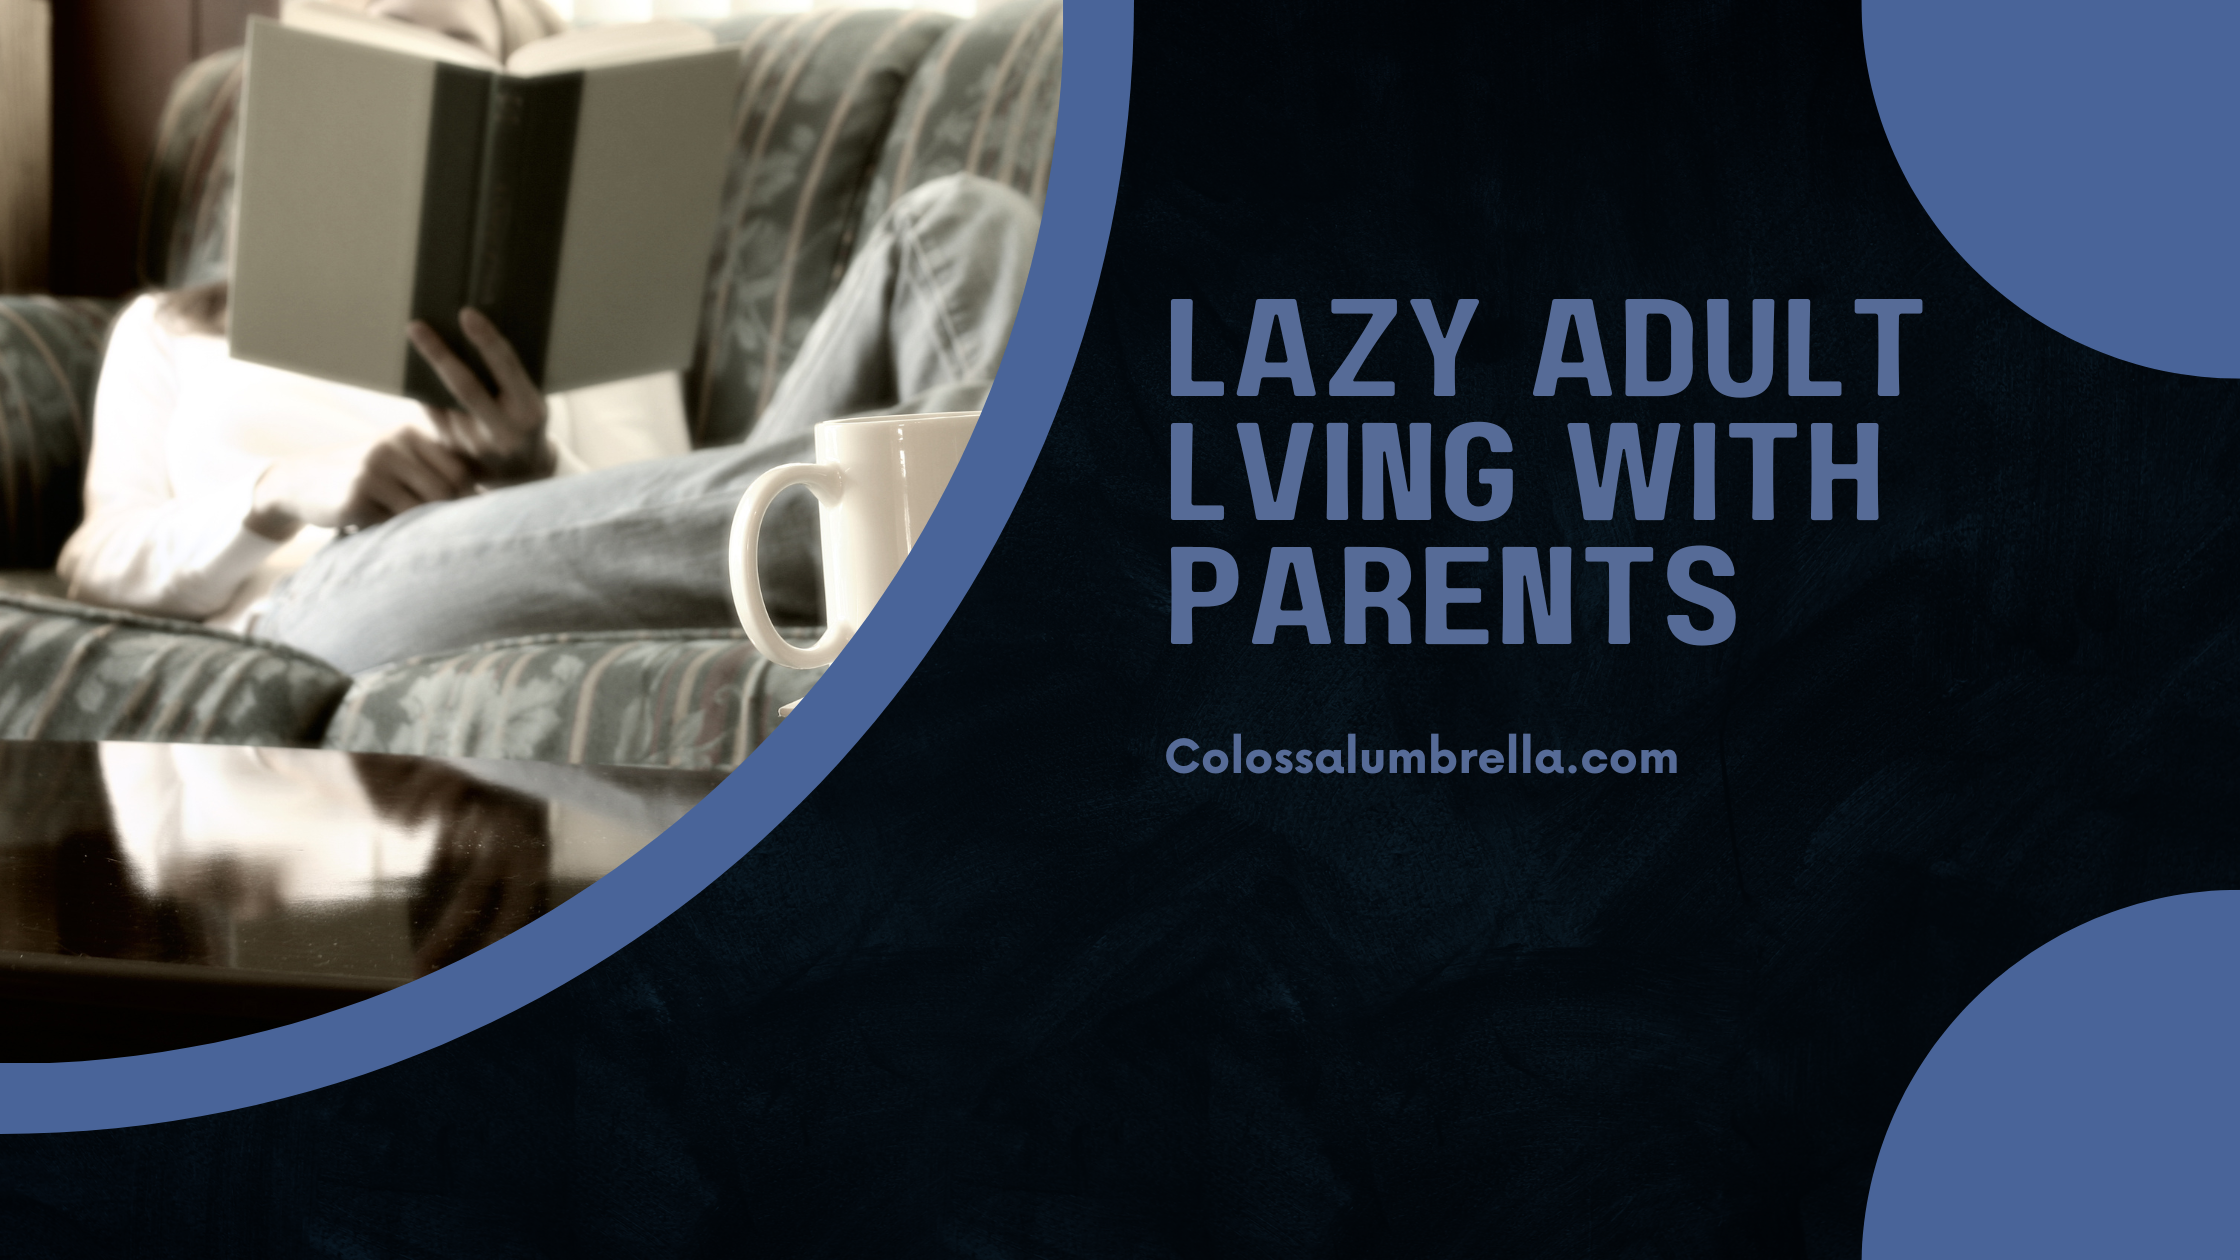 4 Pros and Cons of lazy adults living with parents